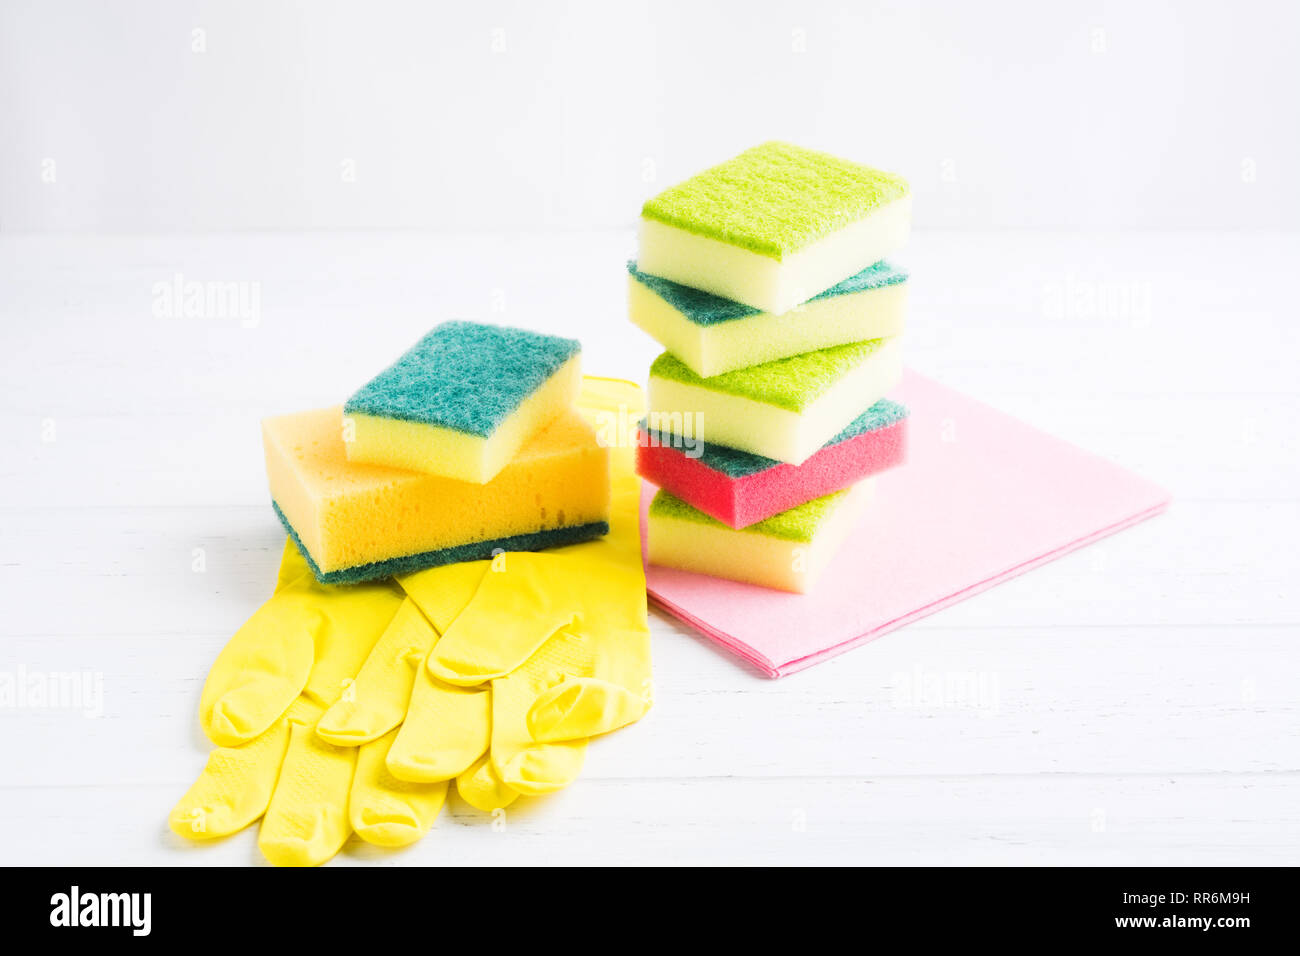 Sponges, washcloth, rubber gloves for domestic housework. Home hygiene concept on wooden table Stock Photo